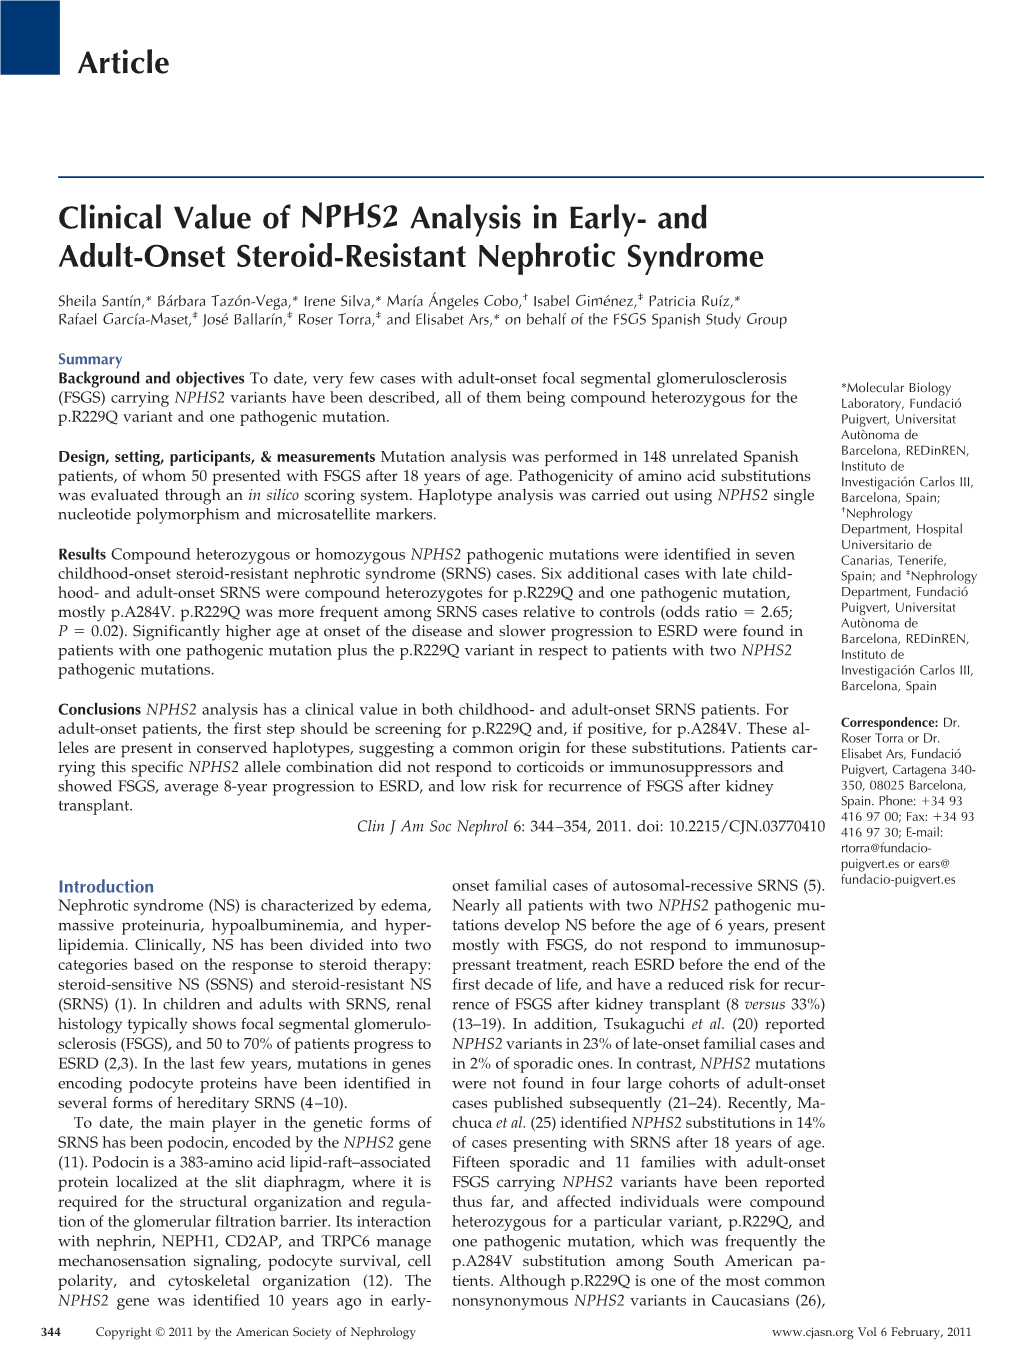 Clinical Value of NPHS2 Analysis in Early- and Adult-Onset Steroid-Resistant Nephrotic Syndrome